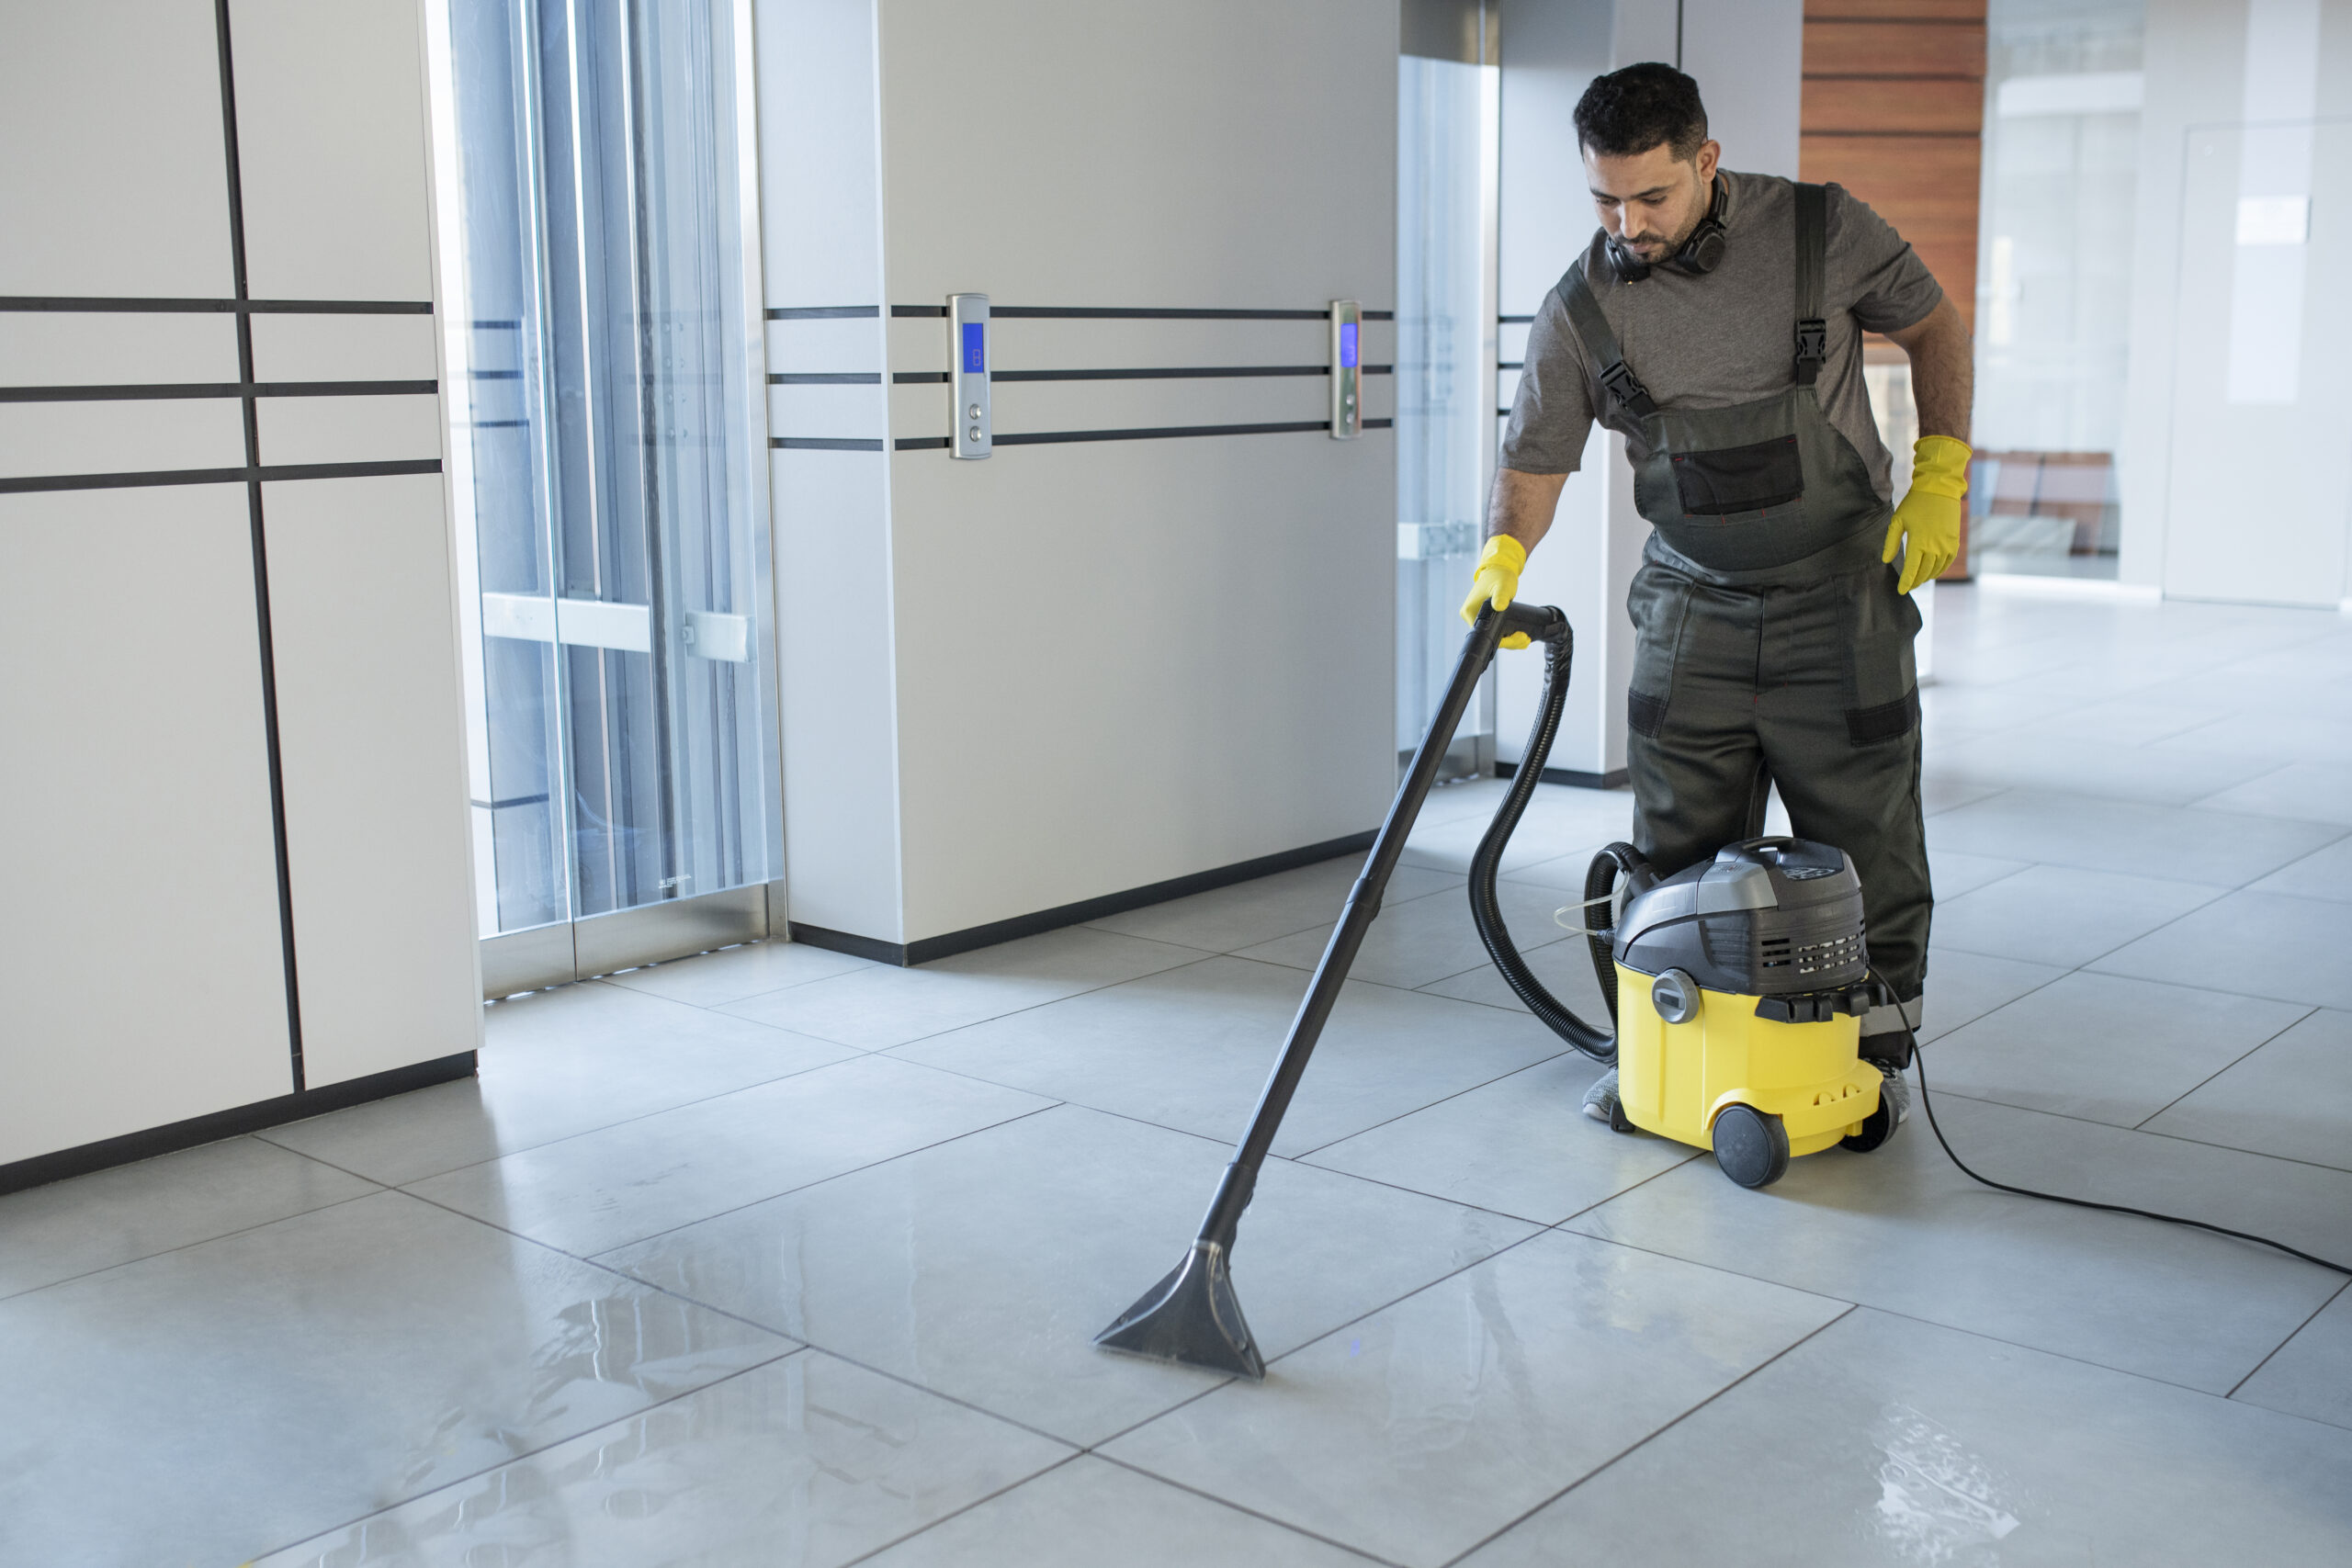 Five Questions you should ask a Cleaning Company before Hiring them.